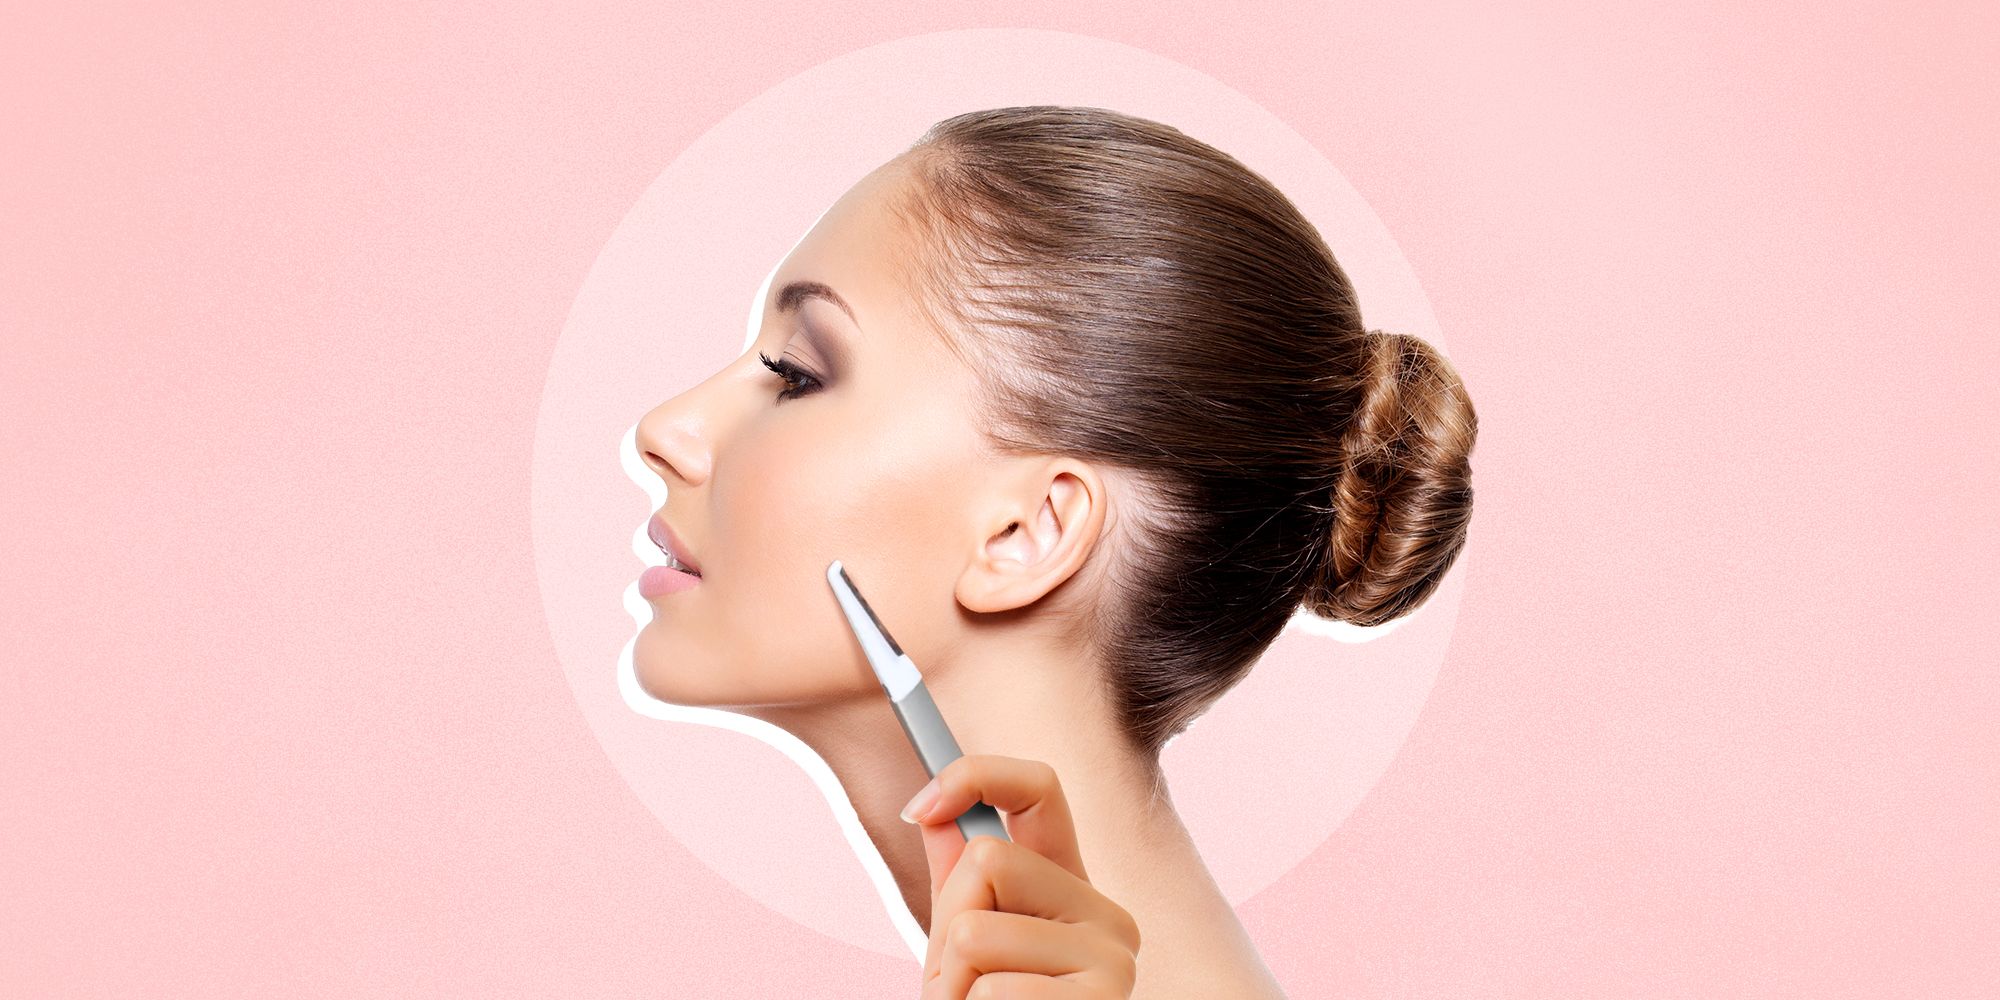 Dermaplaning at Home 101 Best Dermaplaning Tools to image pic